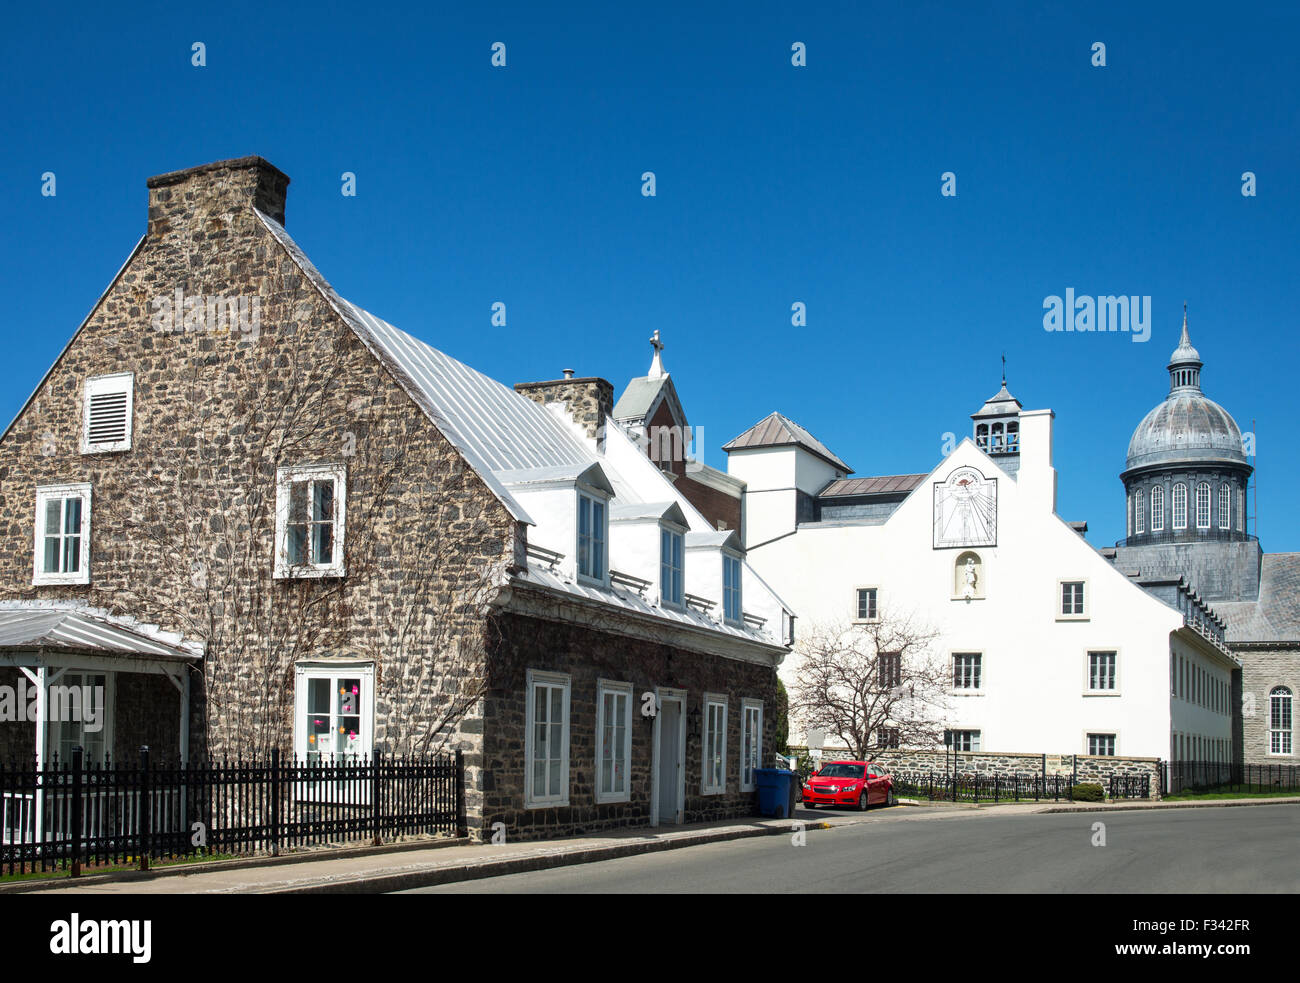 Quebec, Trois Rivieres, Ursuline street with the Ursuline monastery and old houses Stock Photo